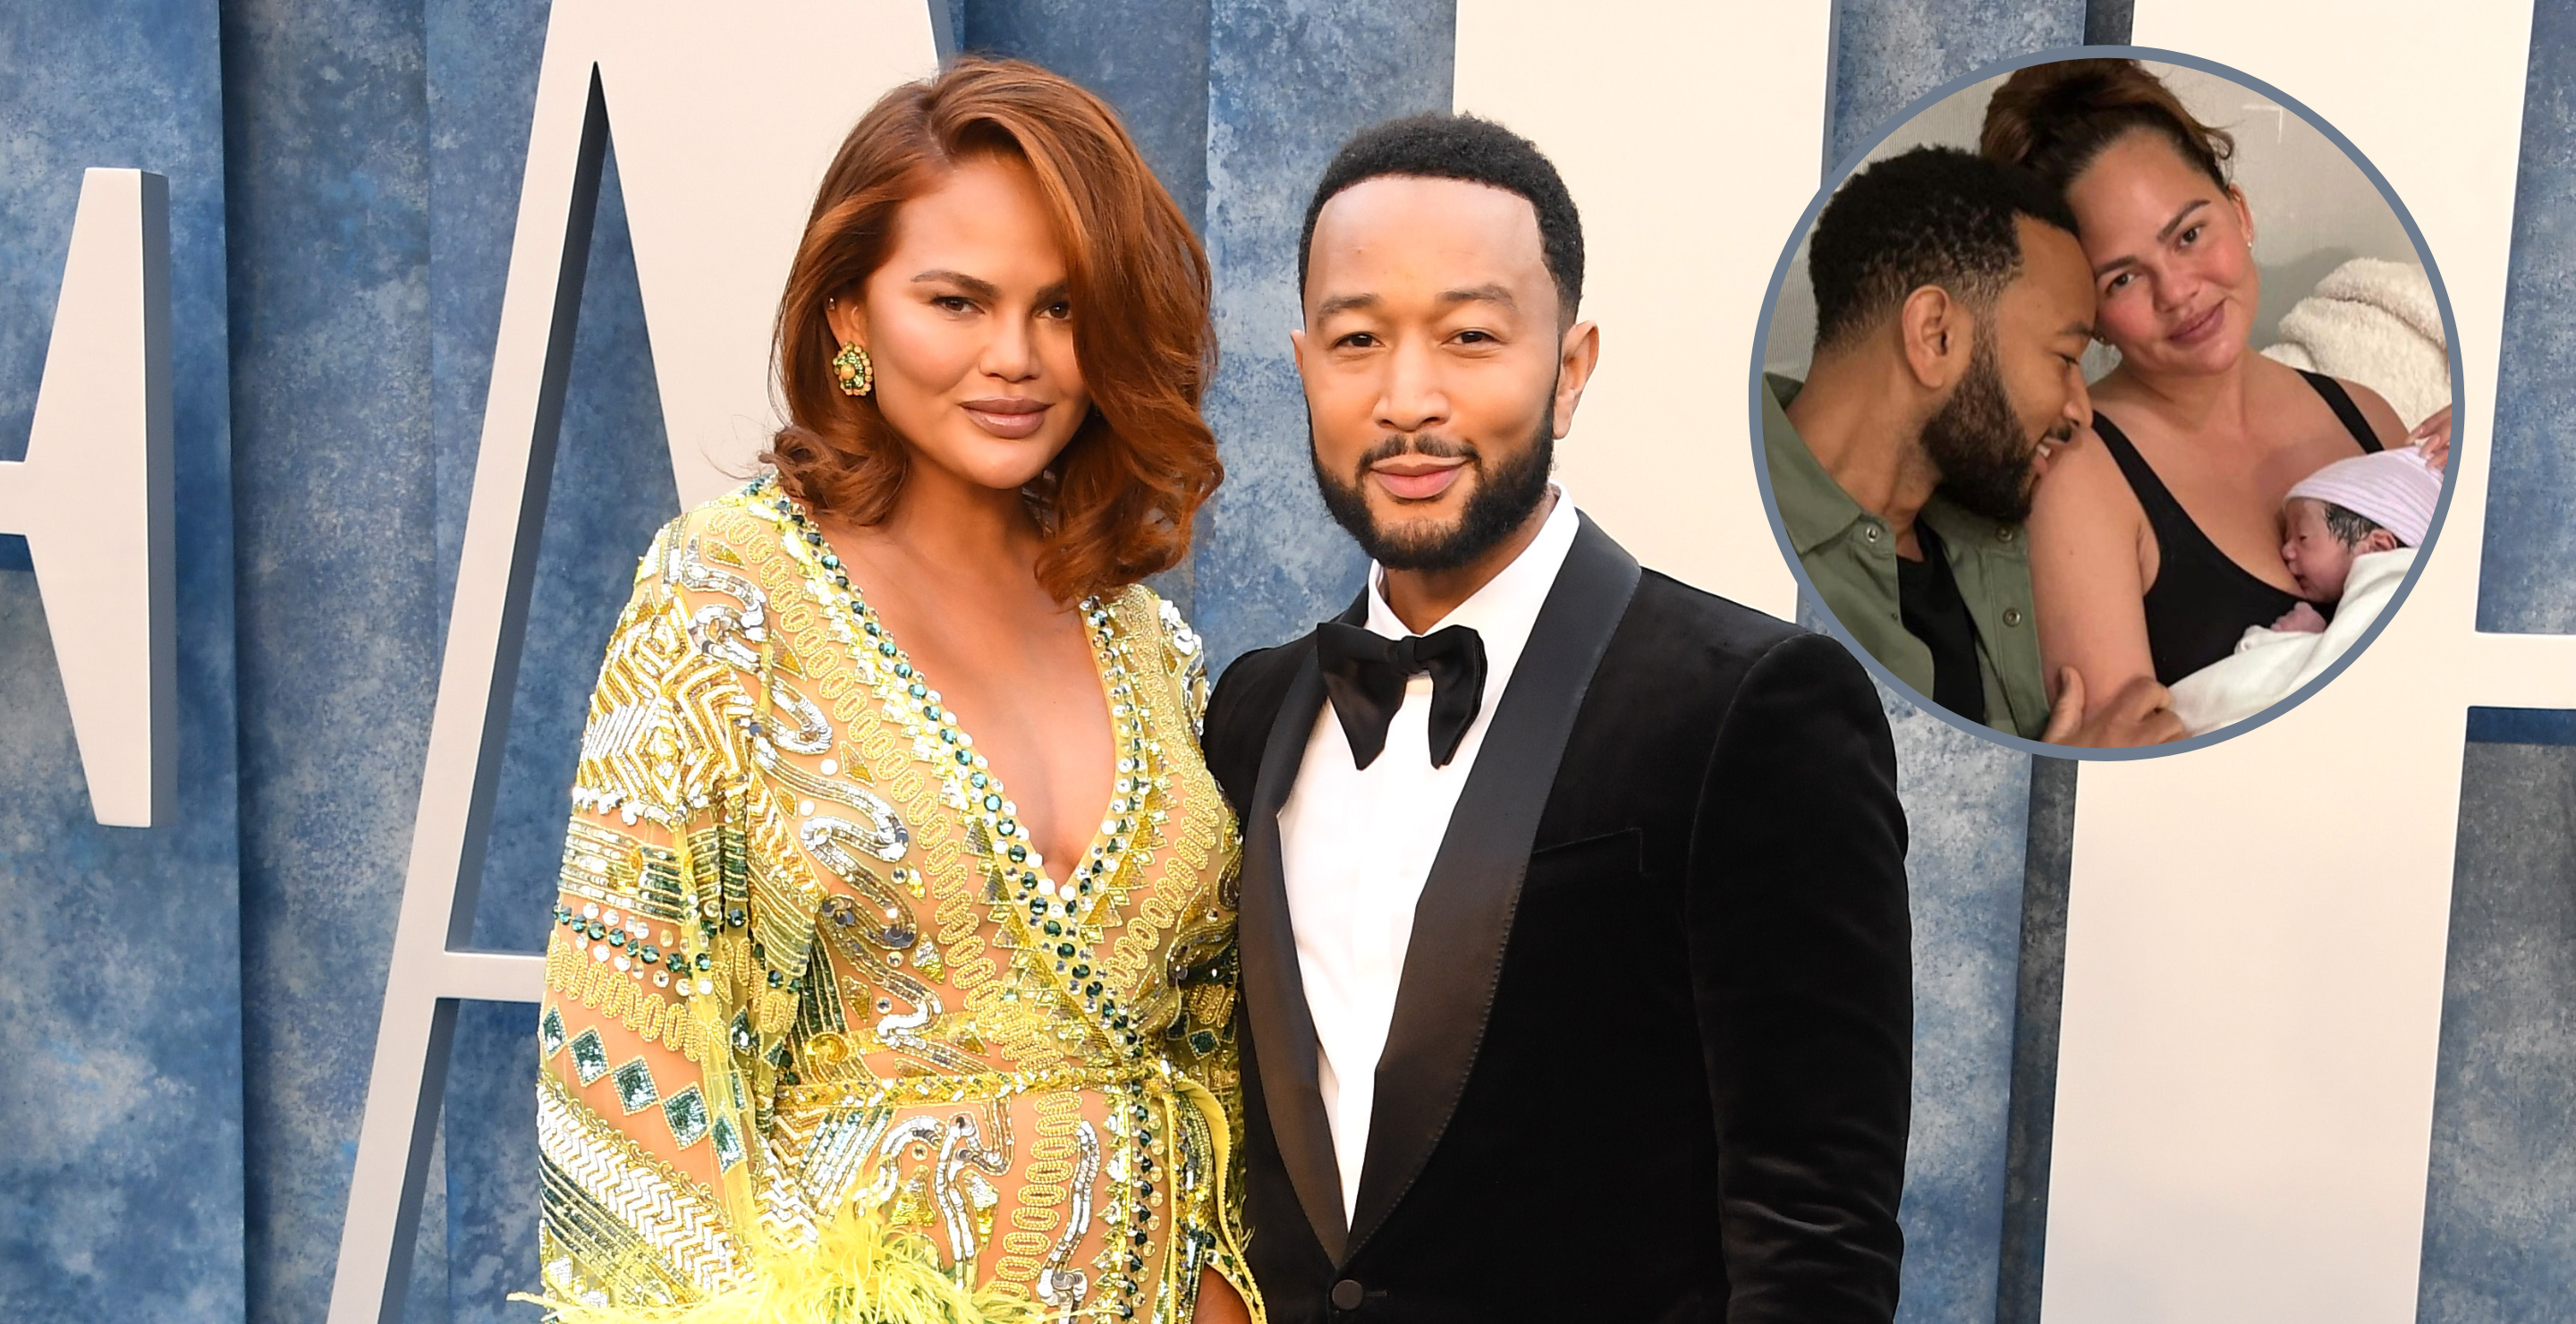 Chrissy Teigen, John Legend arrives at the Vanity Fair Oscar Party Hosted By Radhika Jones at Wallis Annenberg Center for the Performing Arts on March 12, 2023 in Beverly Hills, California.